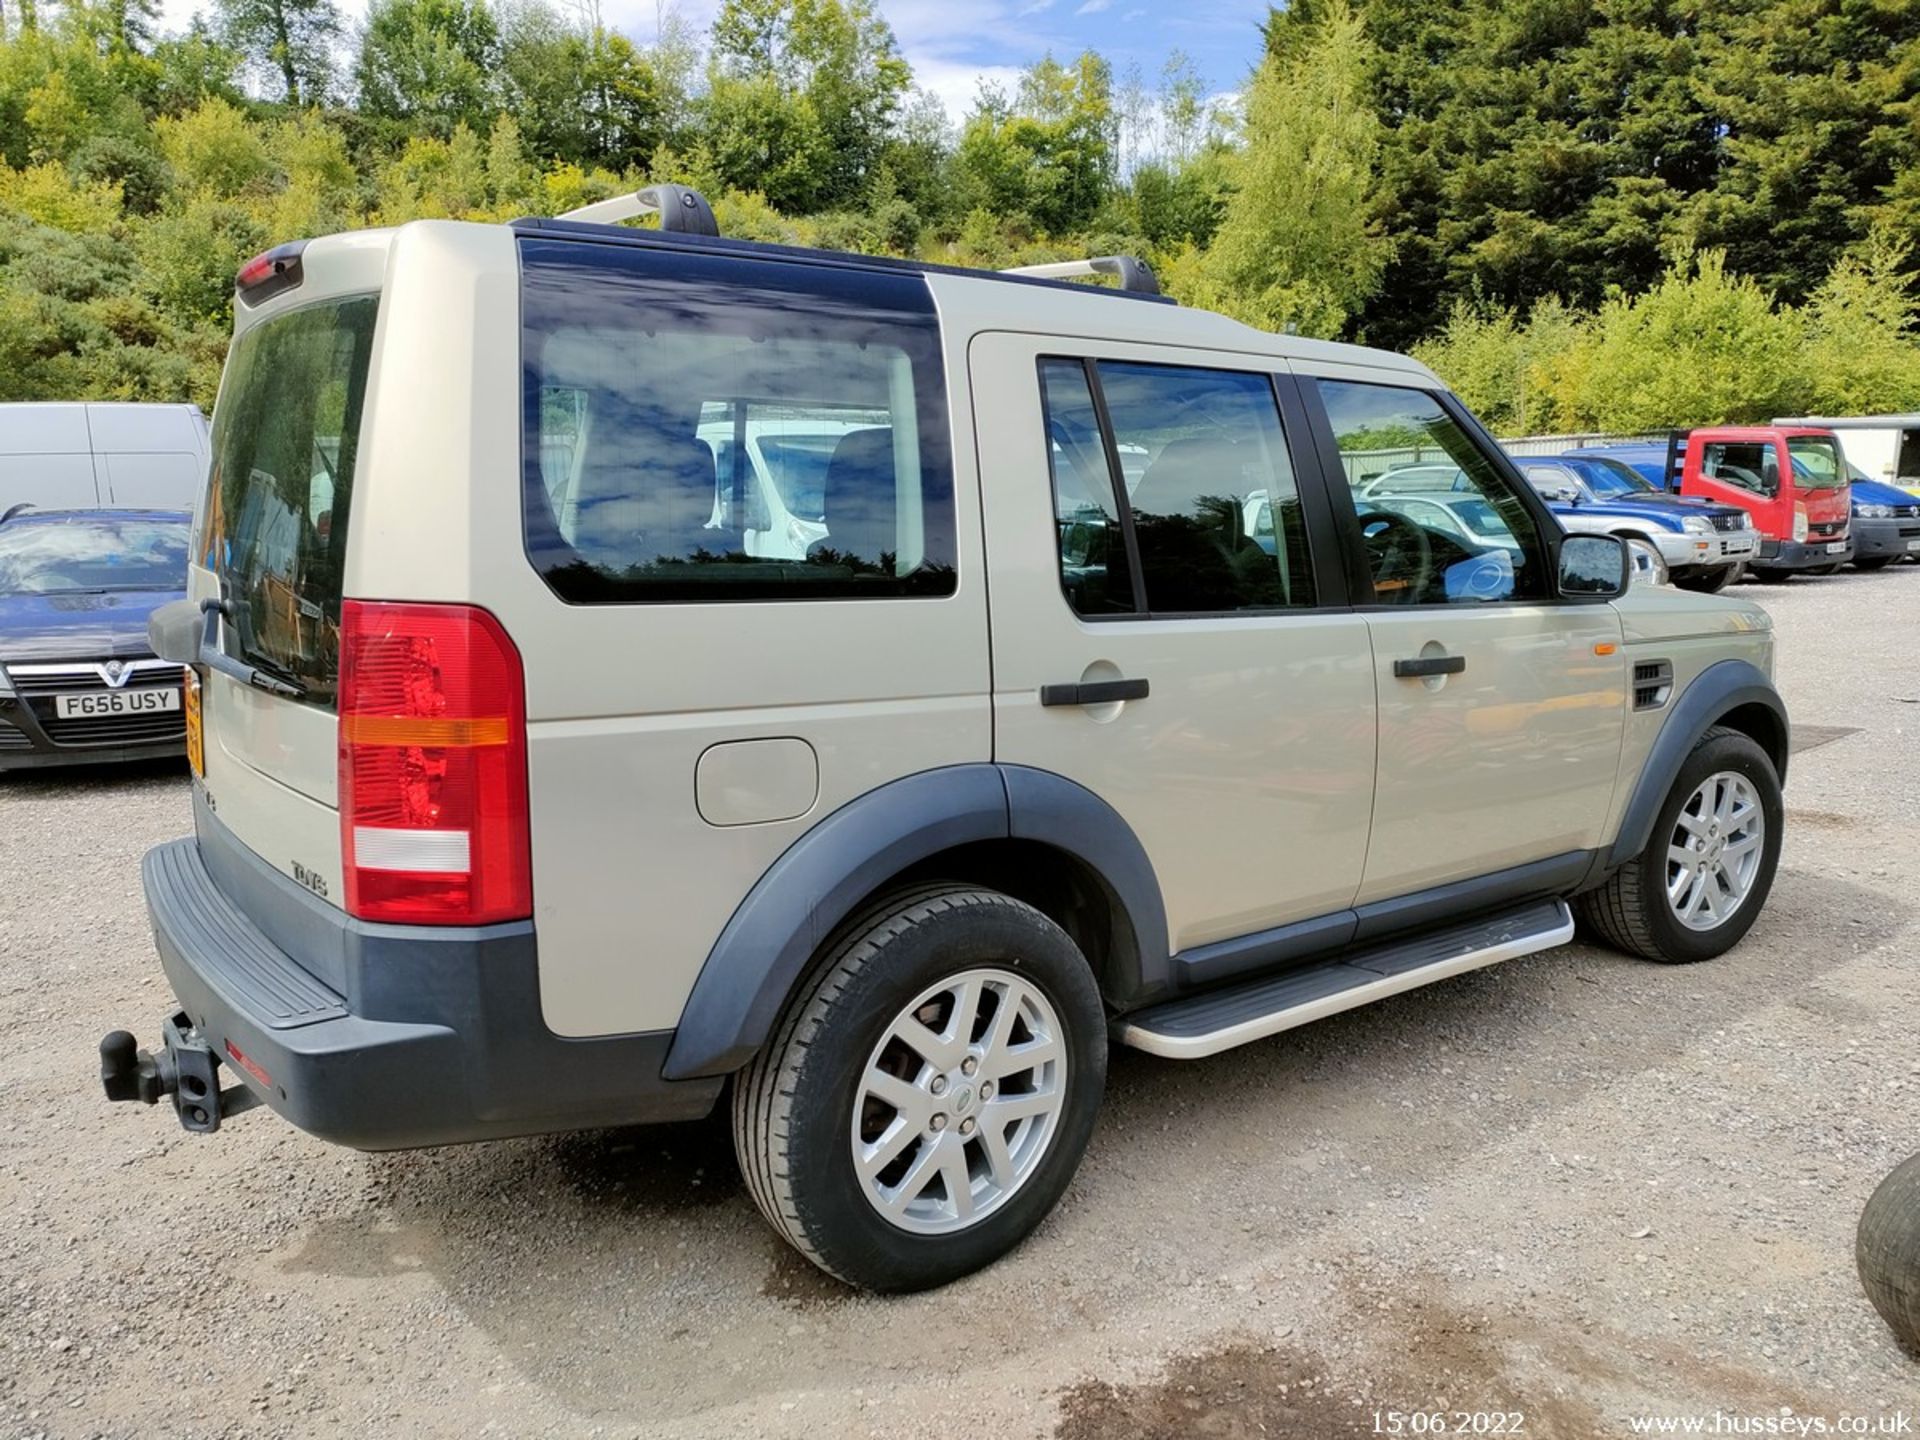 2007 LAND ROVER DISCOVERY - 2720cc 5dr Estate (Gold) - Image 6 of 25